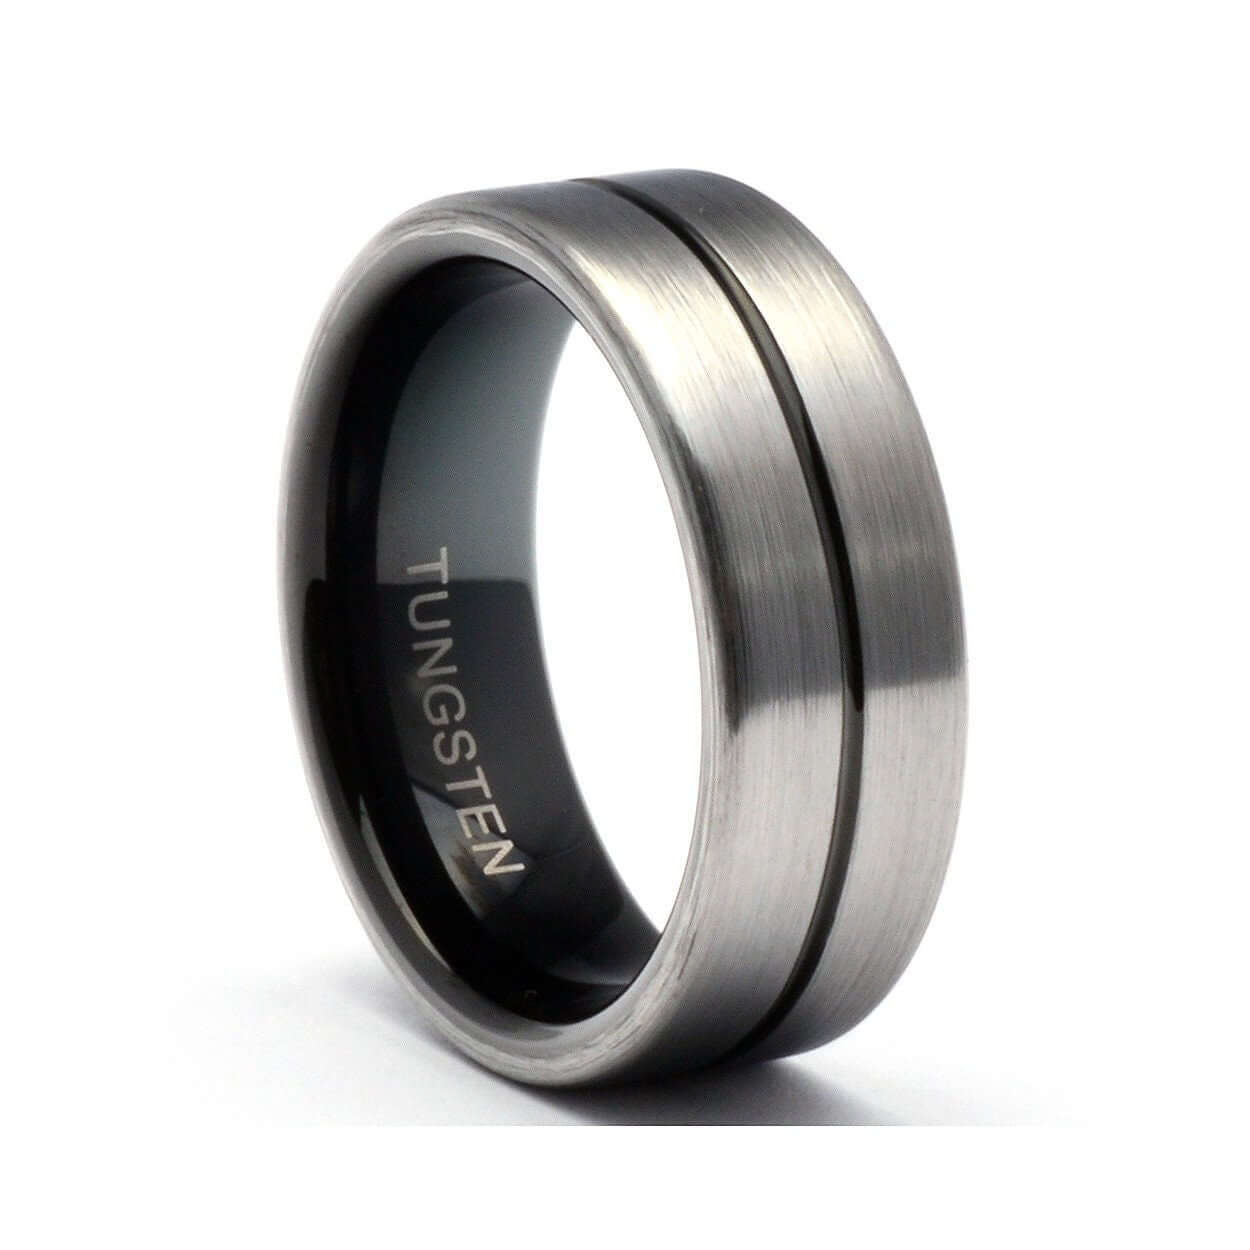 Mens Wedding Band, Tungsten Ring, Mens Wedding Ring, Tungsten Wedding Band, Ring for Men, Women, Tungsten Band, 8MM Wide, Personalized Ring